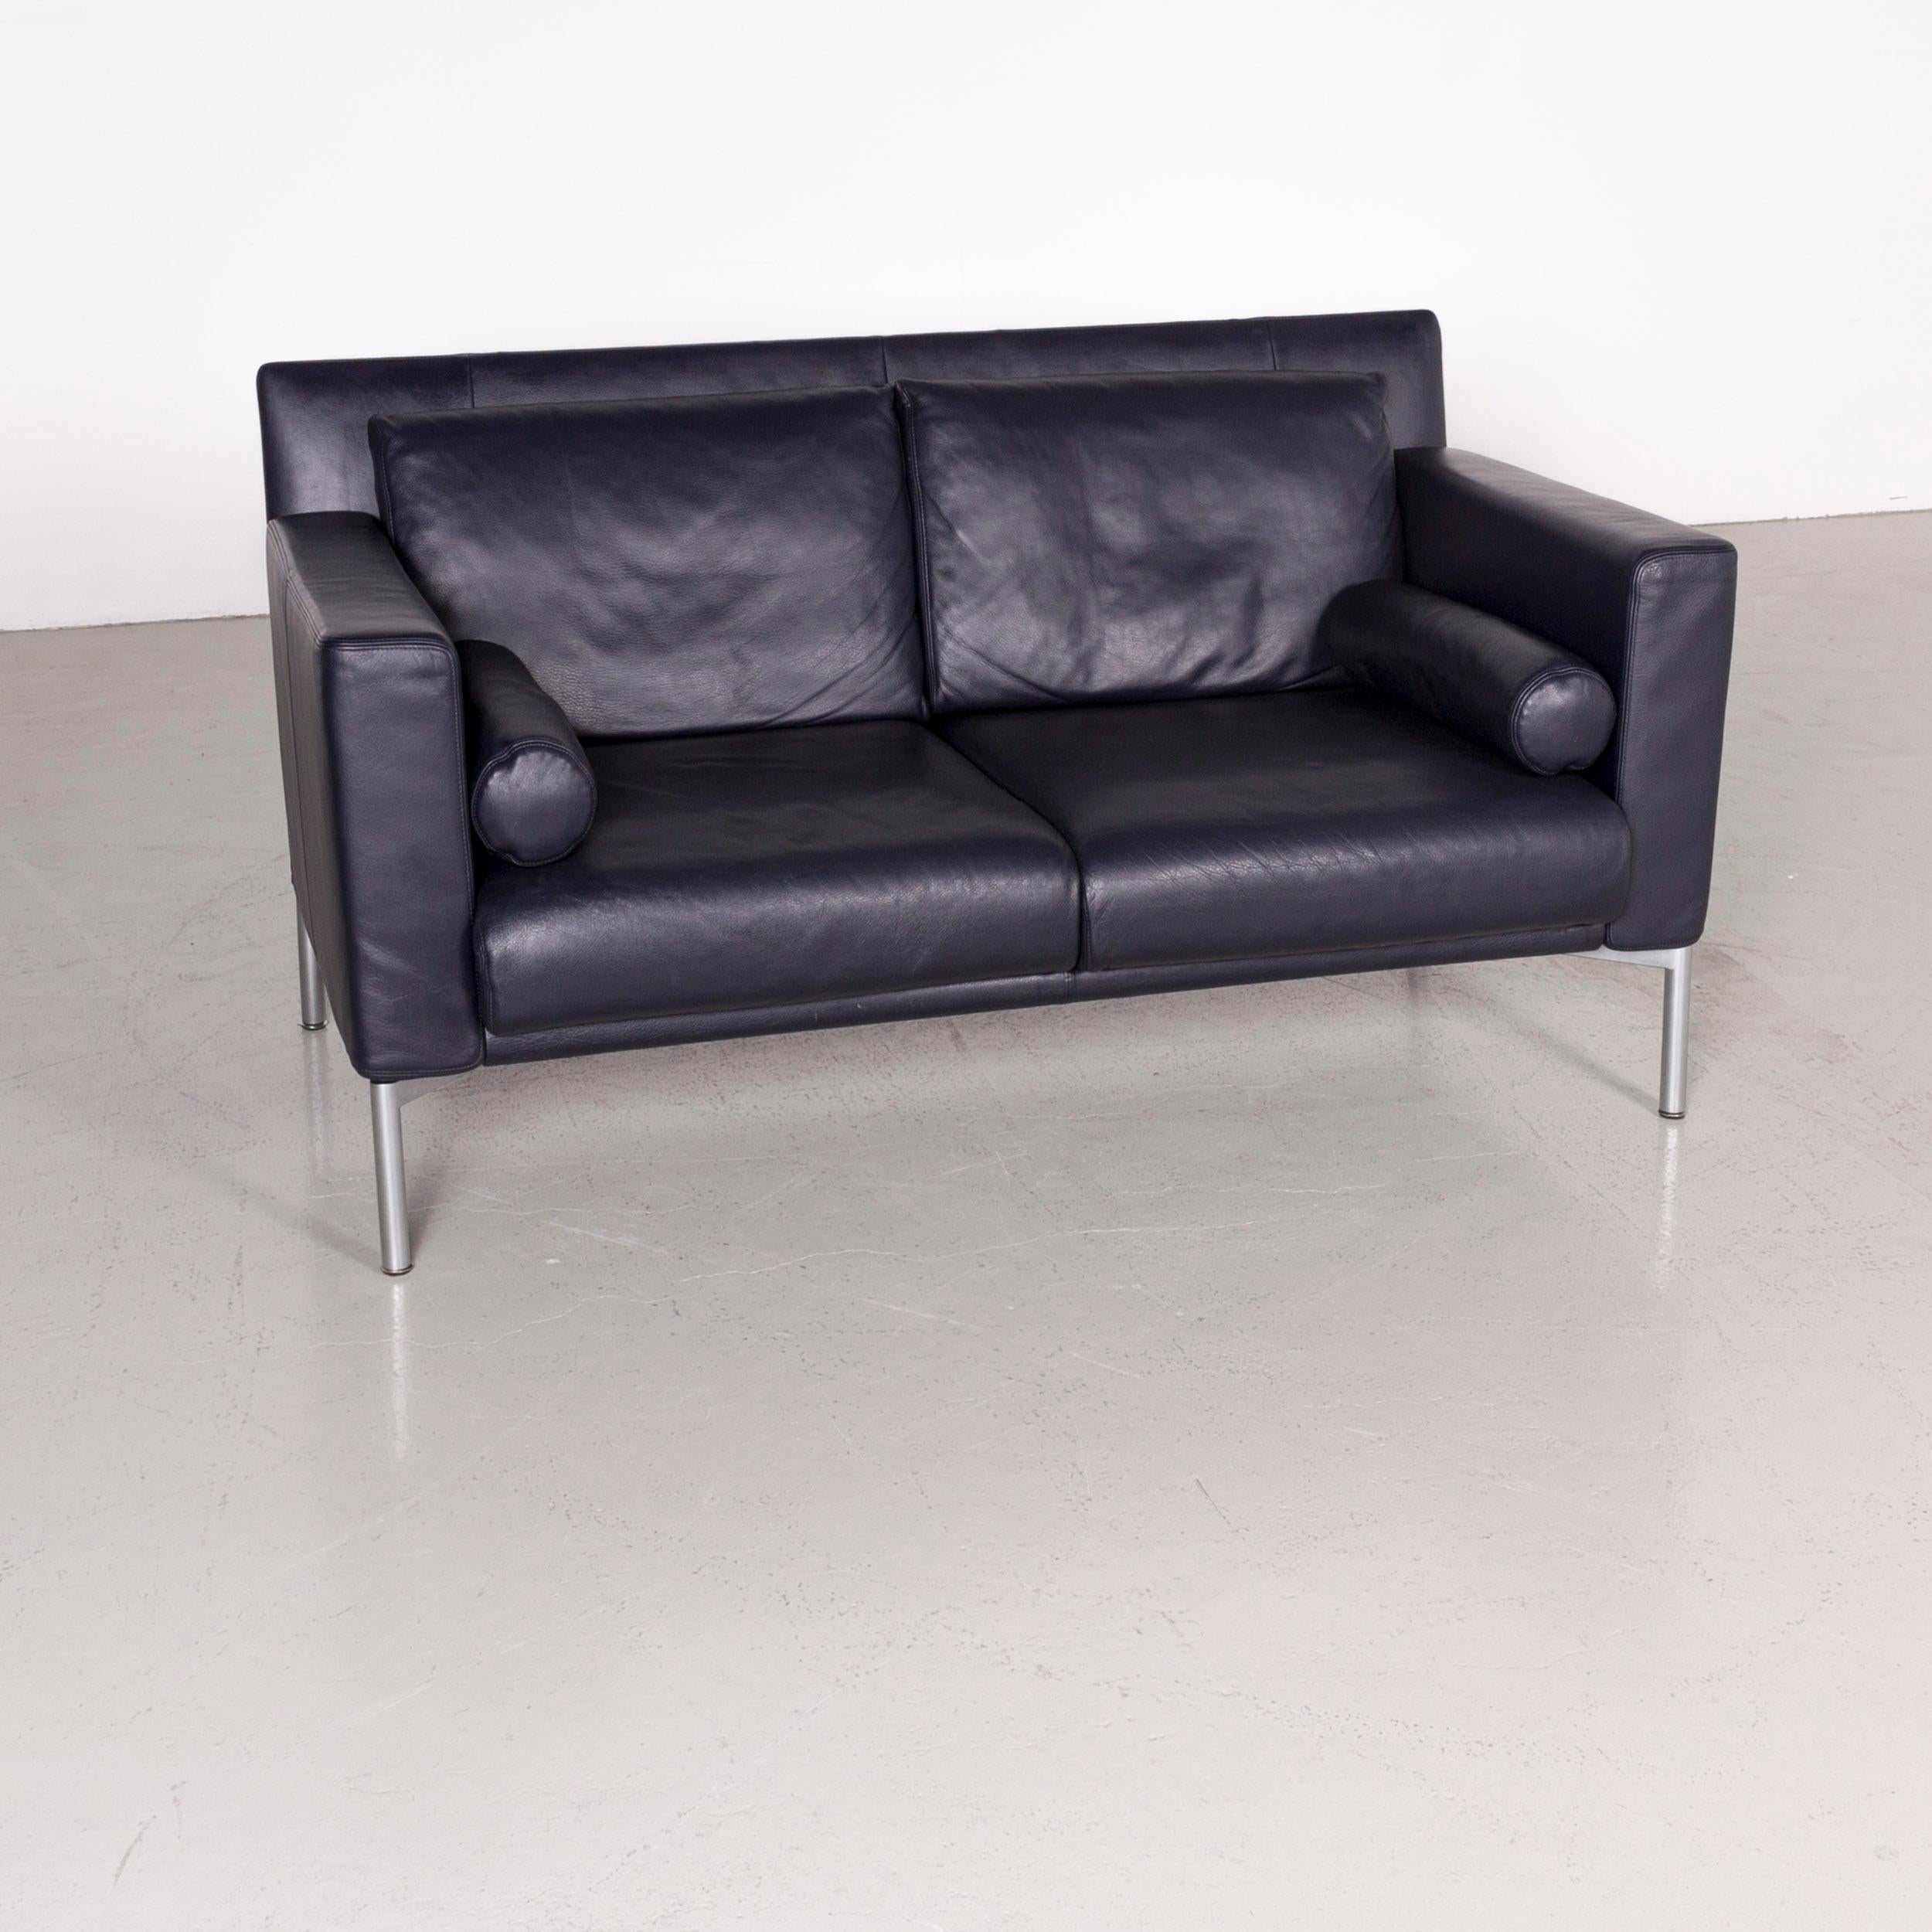 Walter Knoll Jason designer leather couch blue two-seat couch.